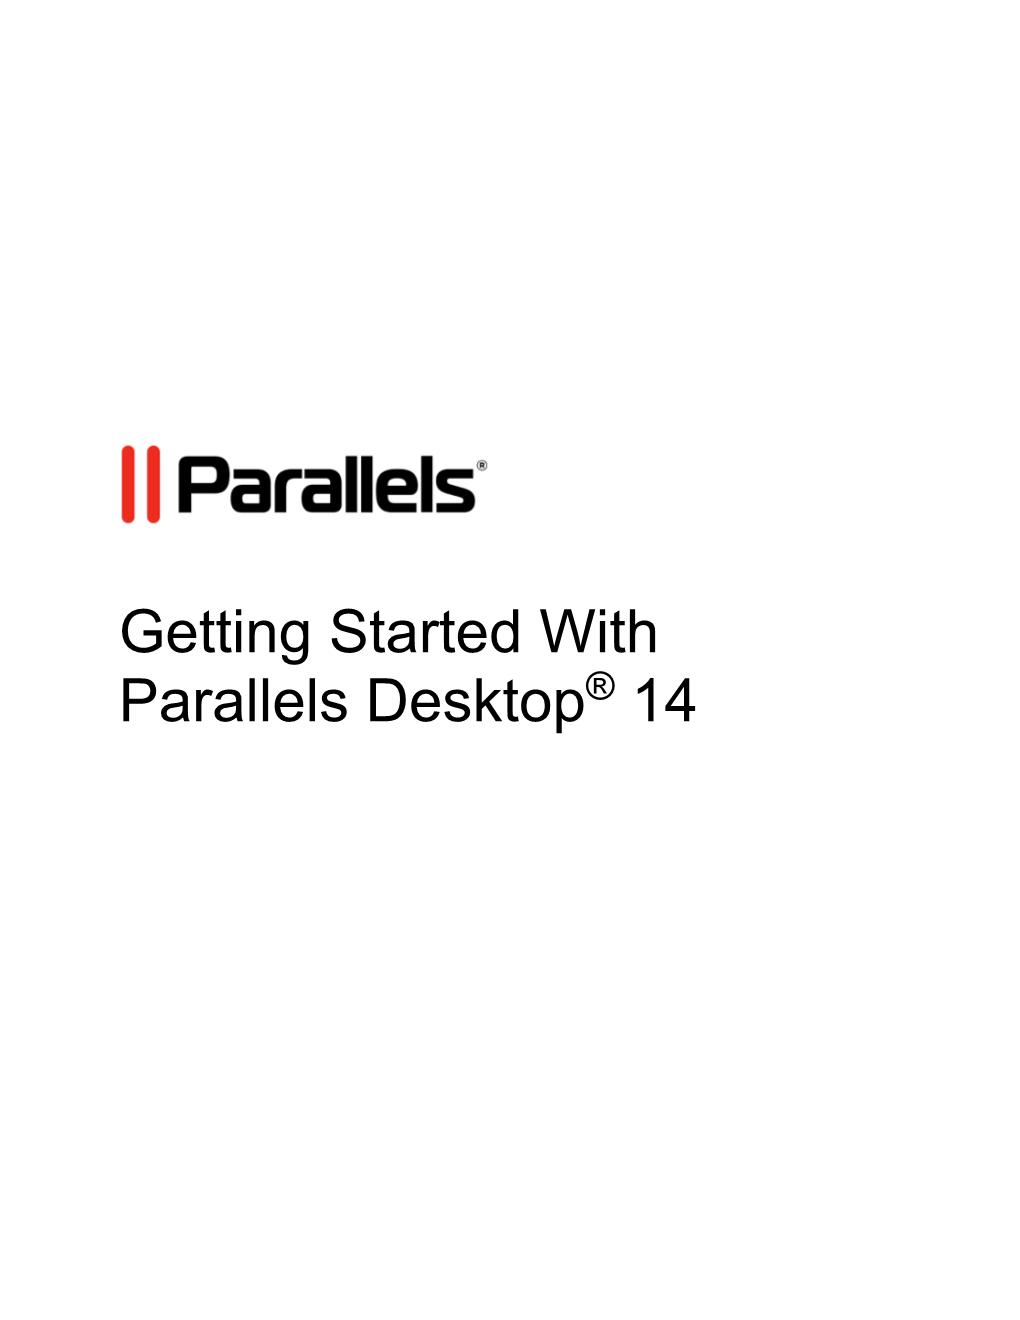 Getting Started with Parallels Desktop® 14